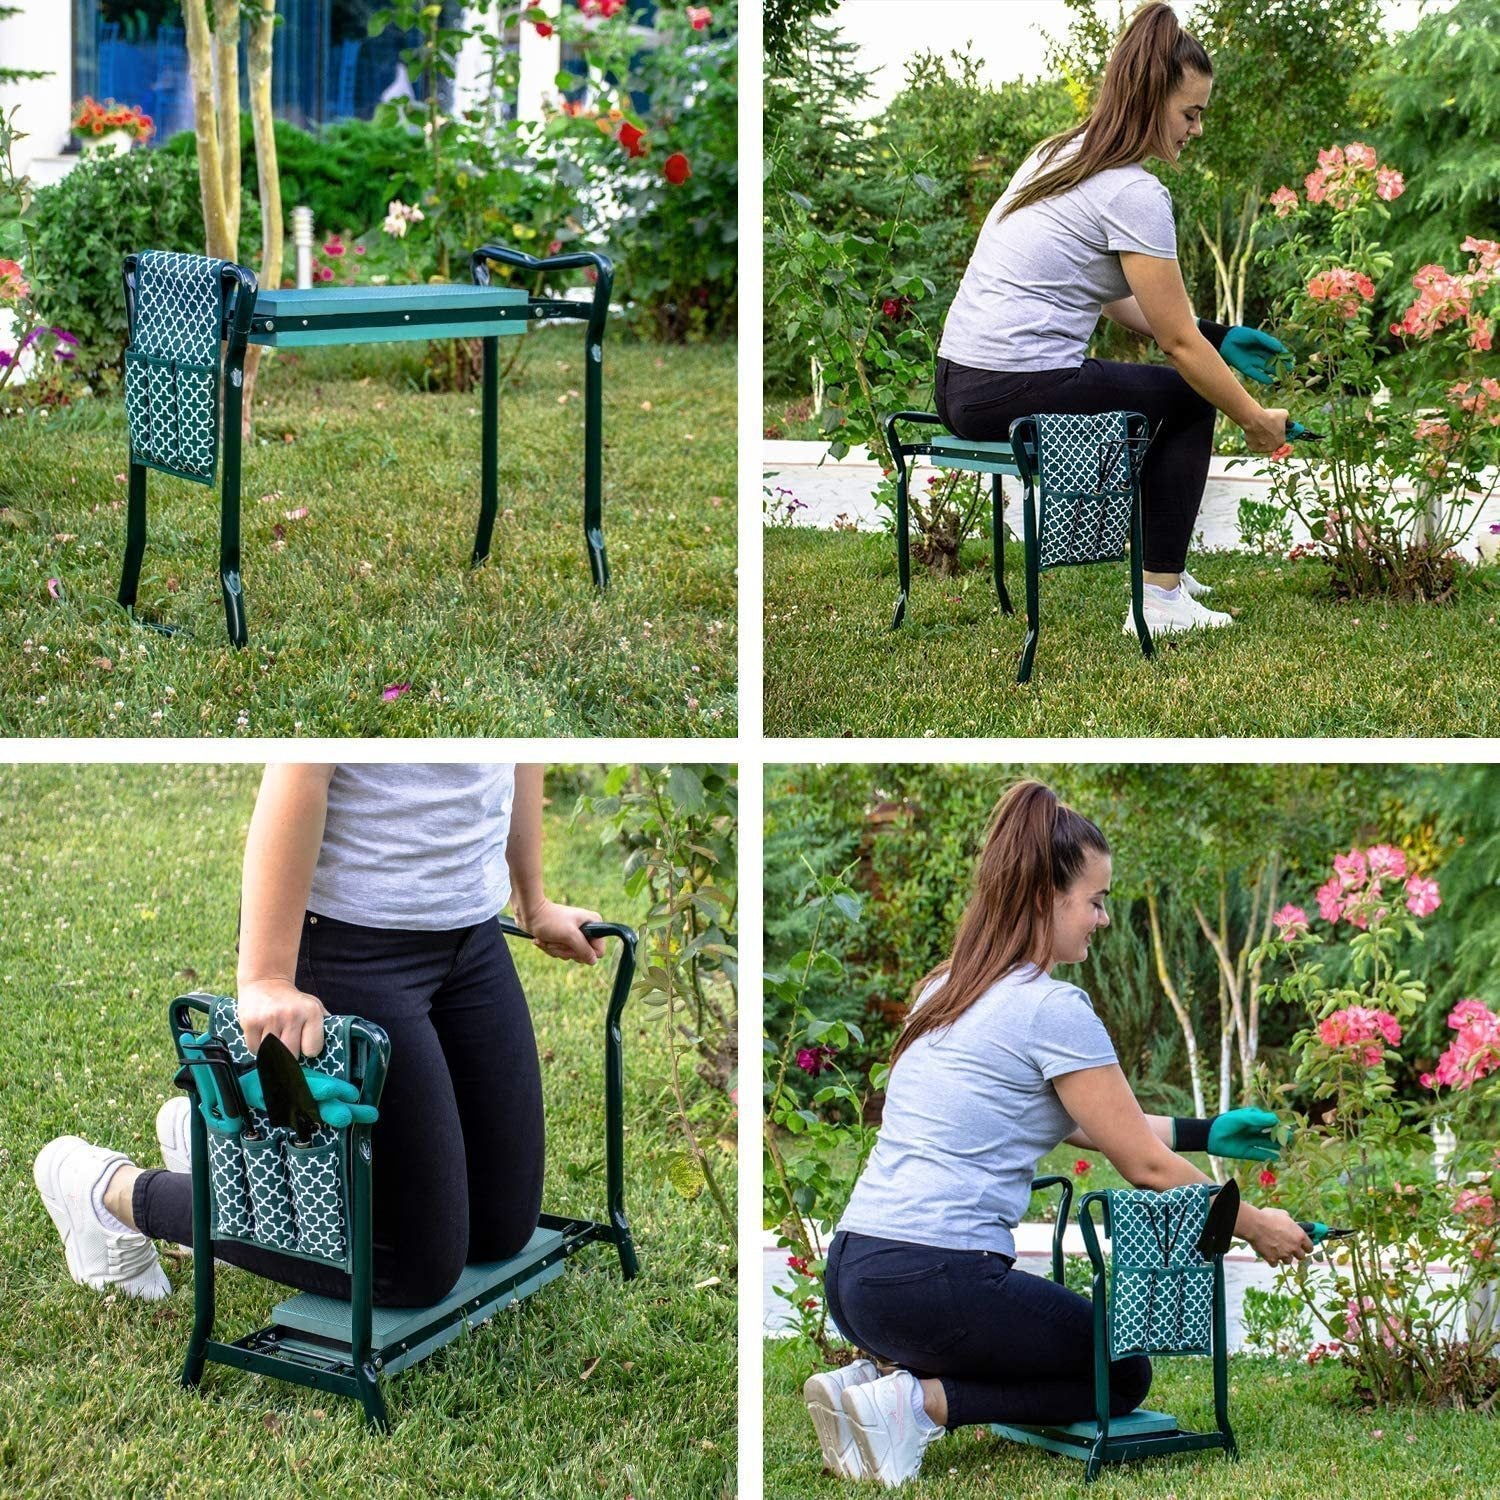 Garden Kneeler And Seat - Protects Your Knees, Clothes From Dirt & Grass Stains